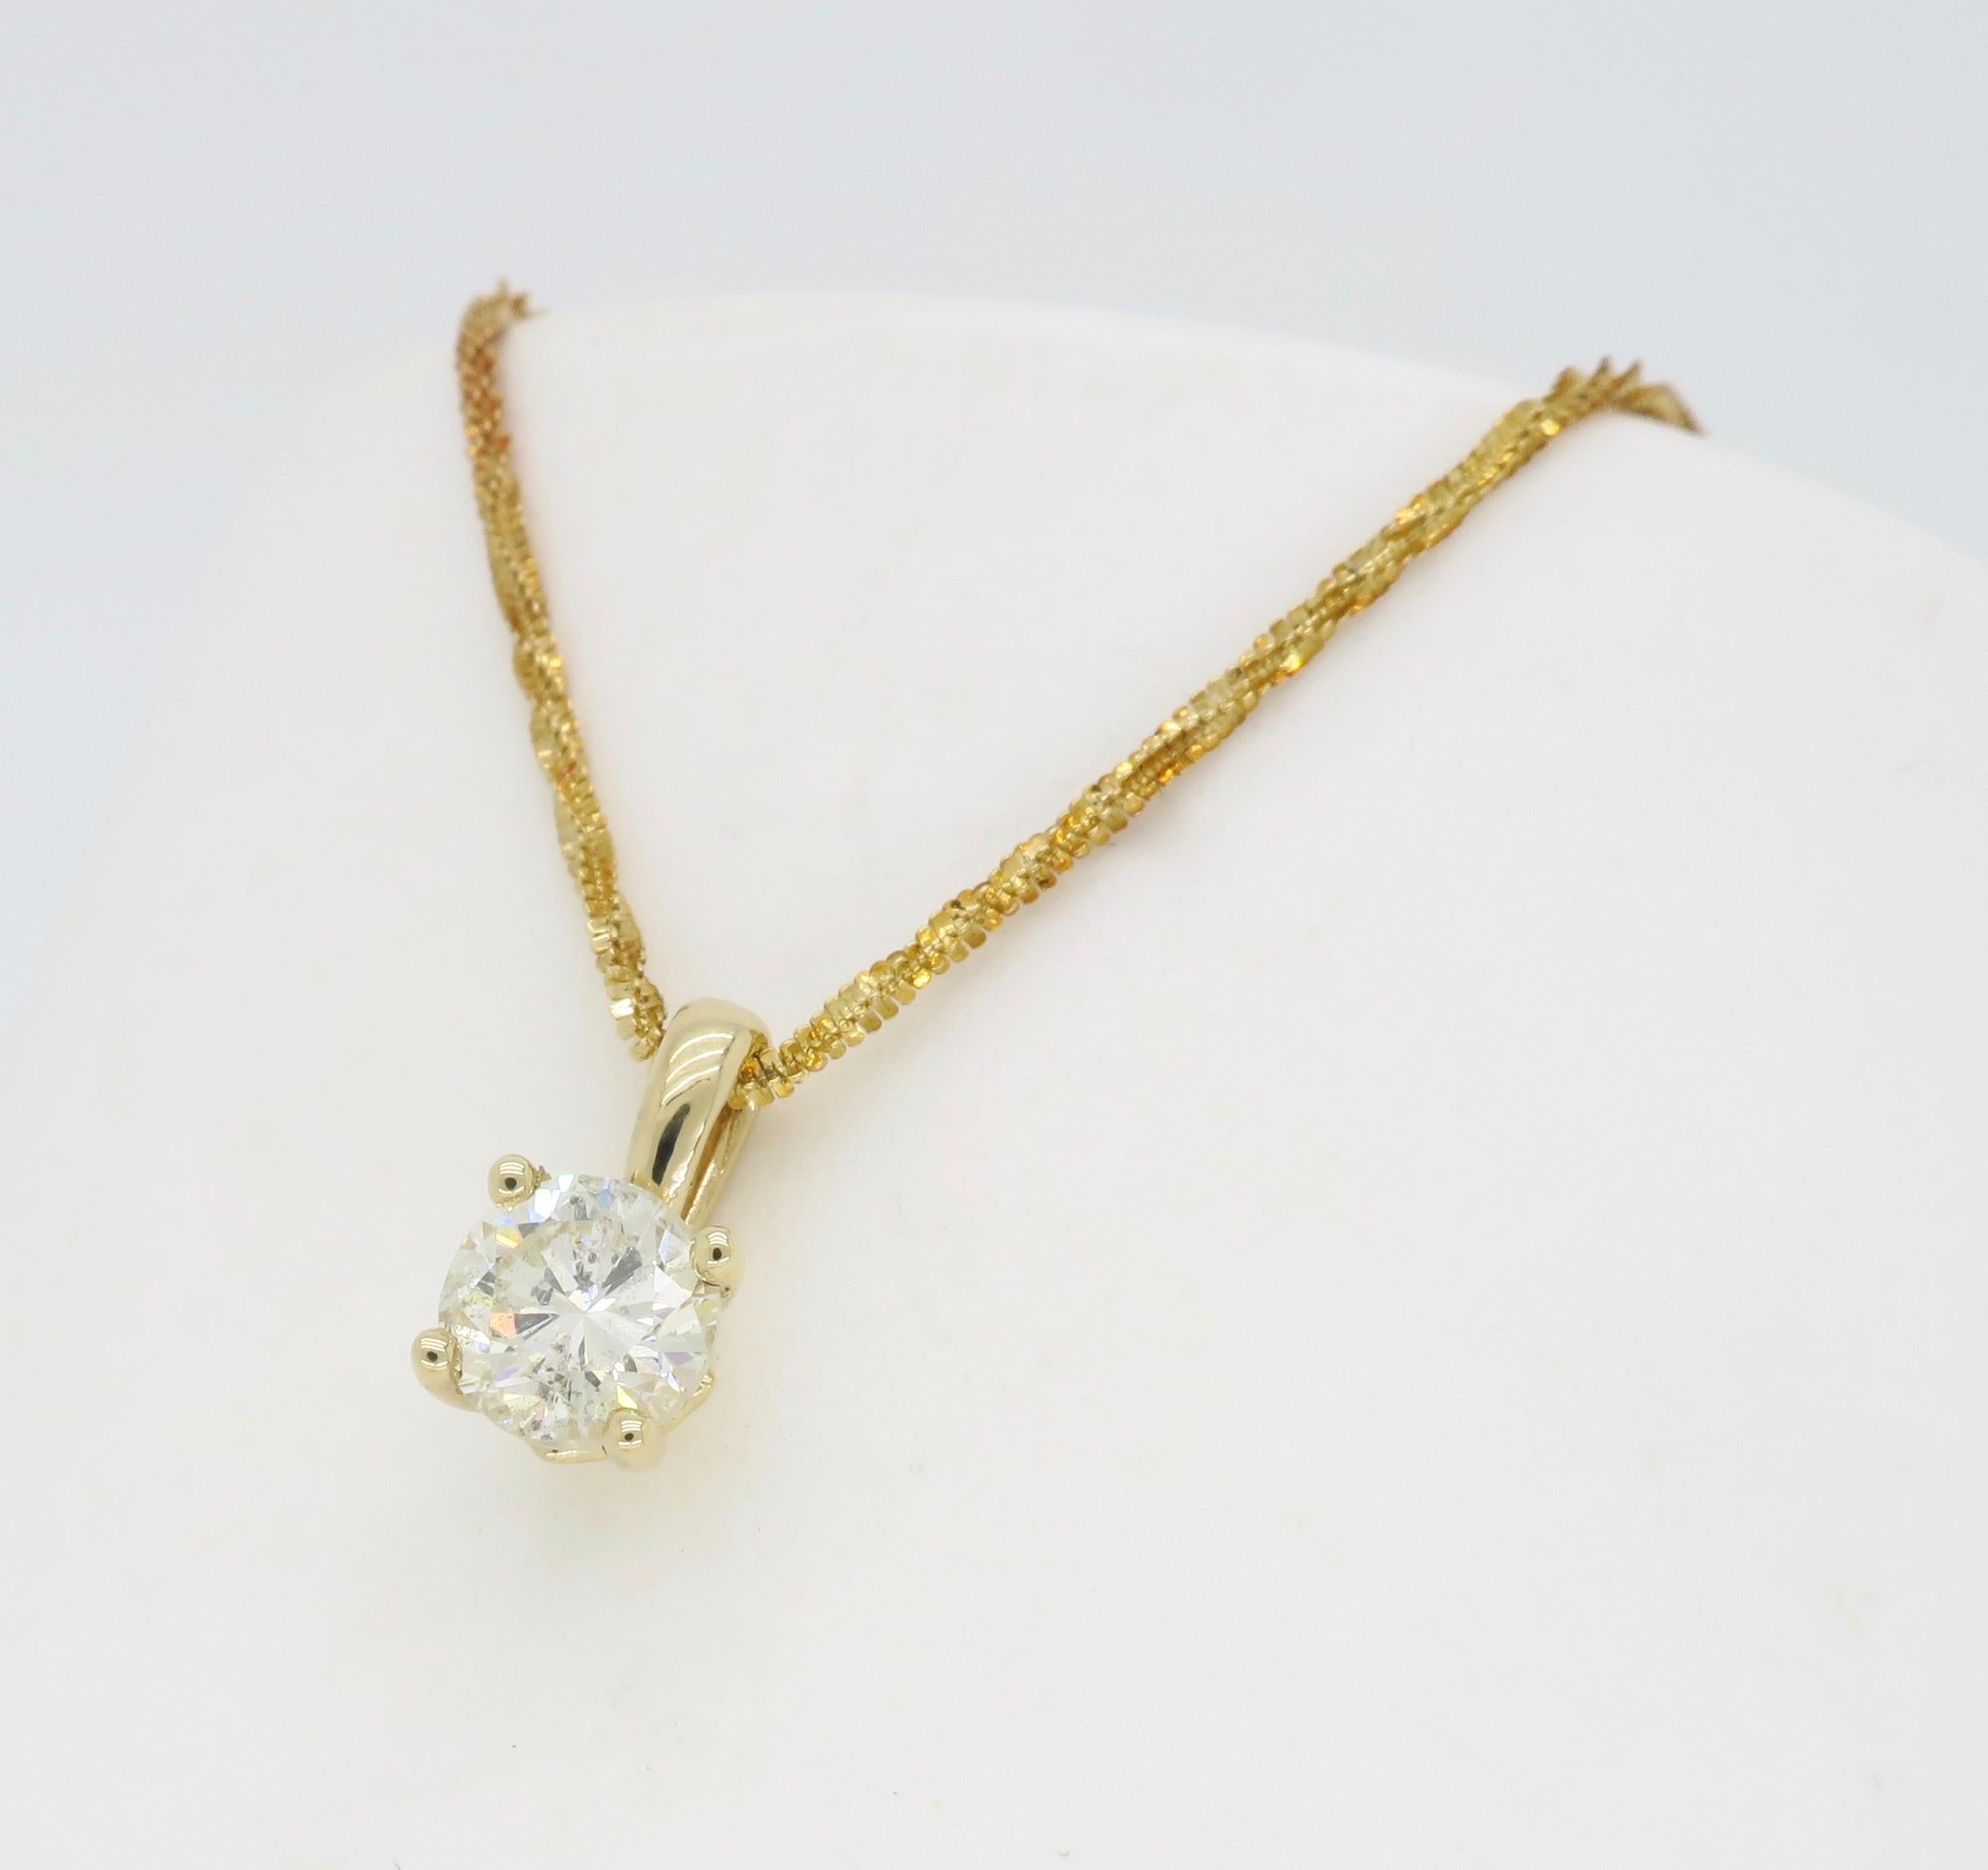 
Classic .75CT solitaire diamond pendant necklace crafted in 14k yellow gold.

Diamond Carat Weight:  .75CT
Diamond Cut: Round Brilliant Cut Diamond
Color: Average L
Clarity: I1
Metal: 14K Yellow Gold
Chain Length: 18” Long
Marked/Tested: Stamped 